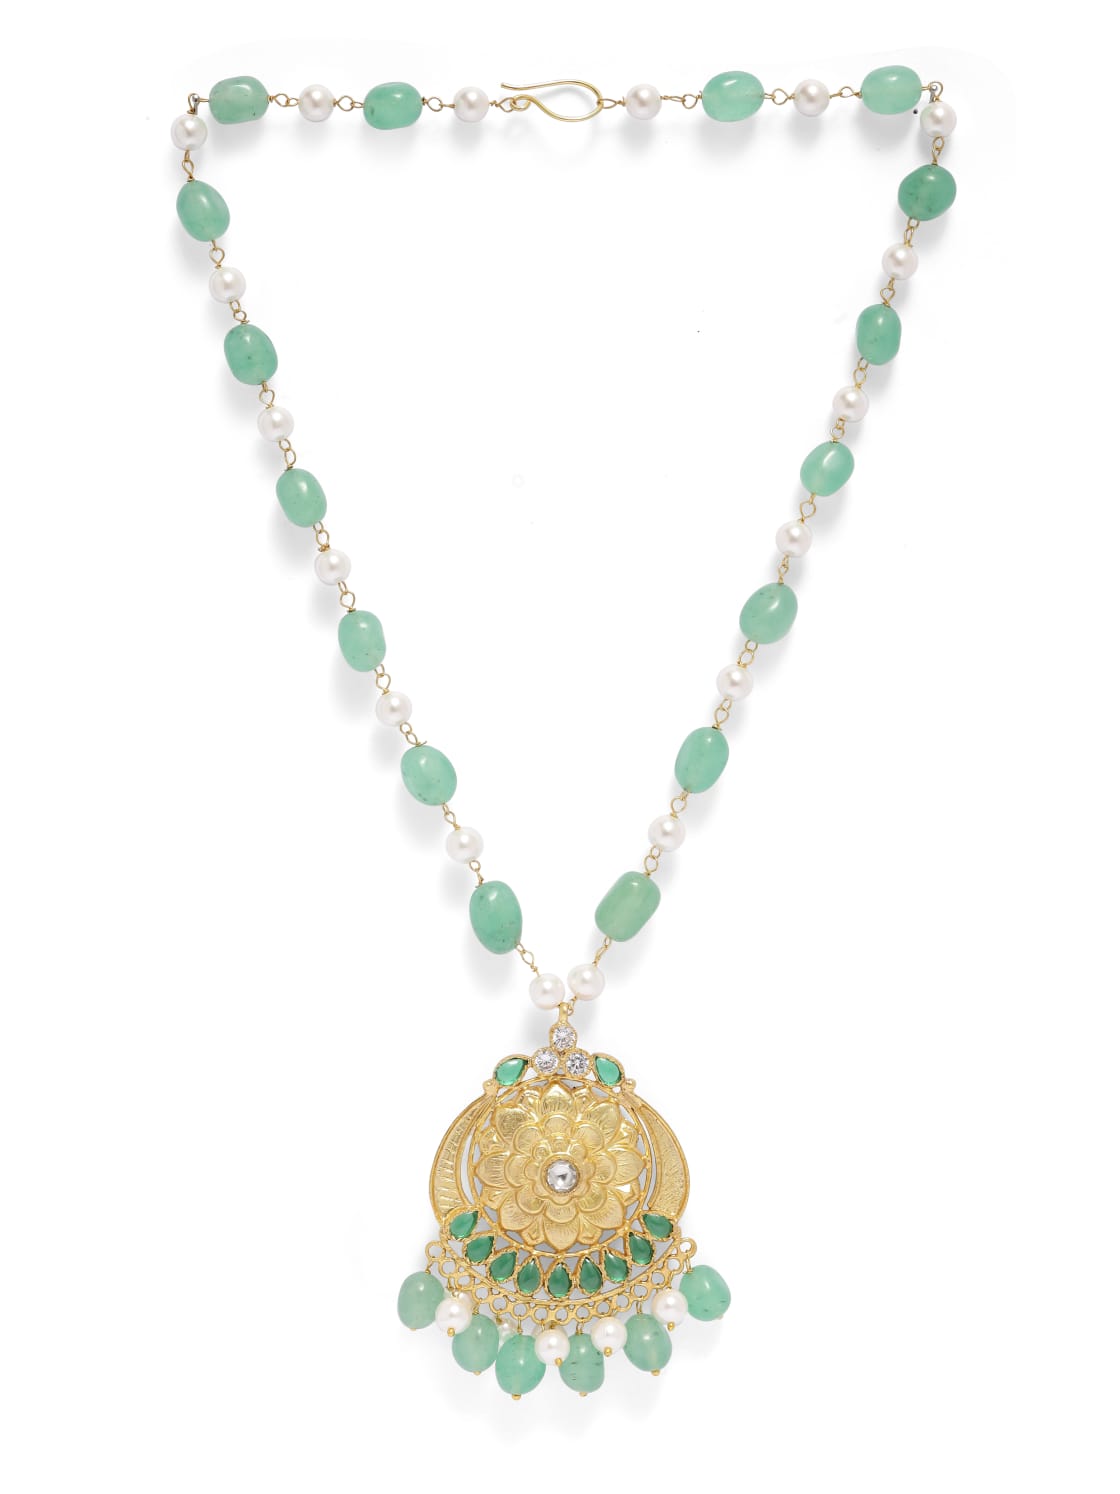 92.5 sterling Silver Gold plated Jadau traditional Pearls with green beads chain necklace.